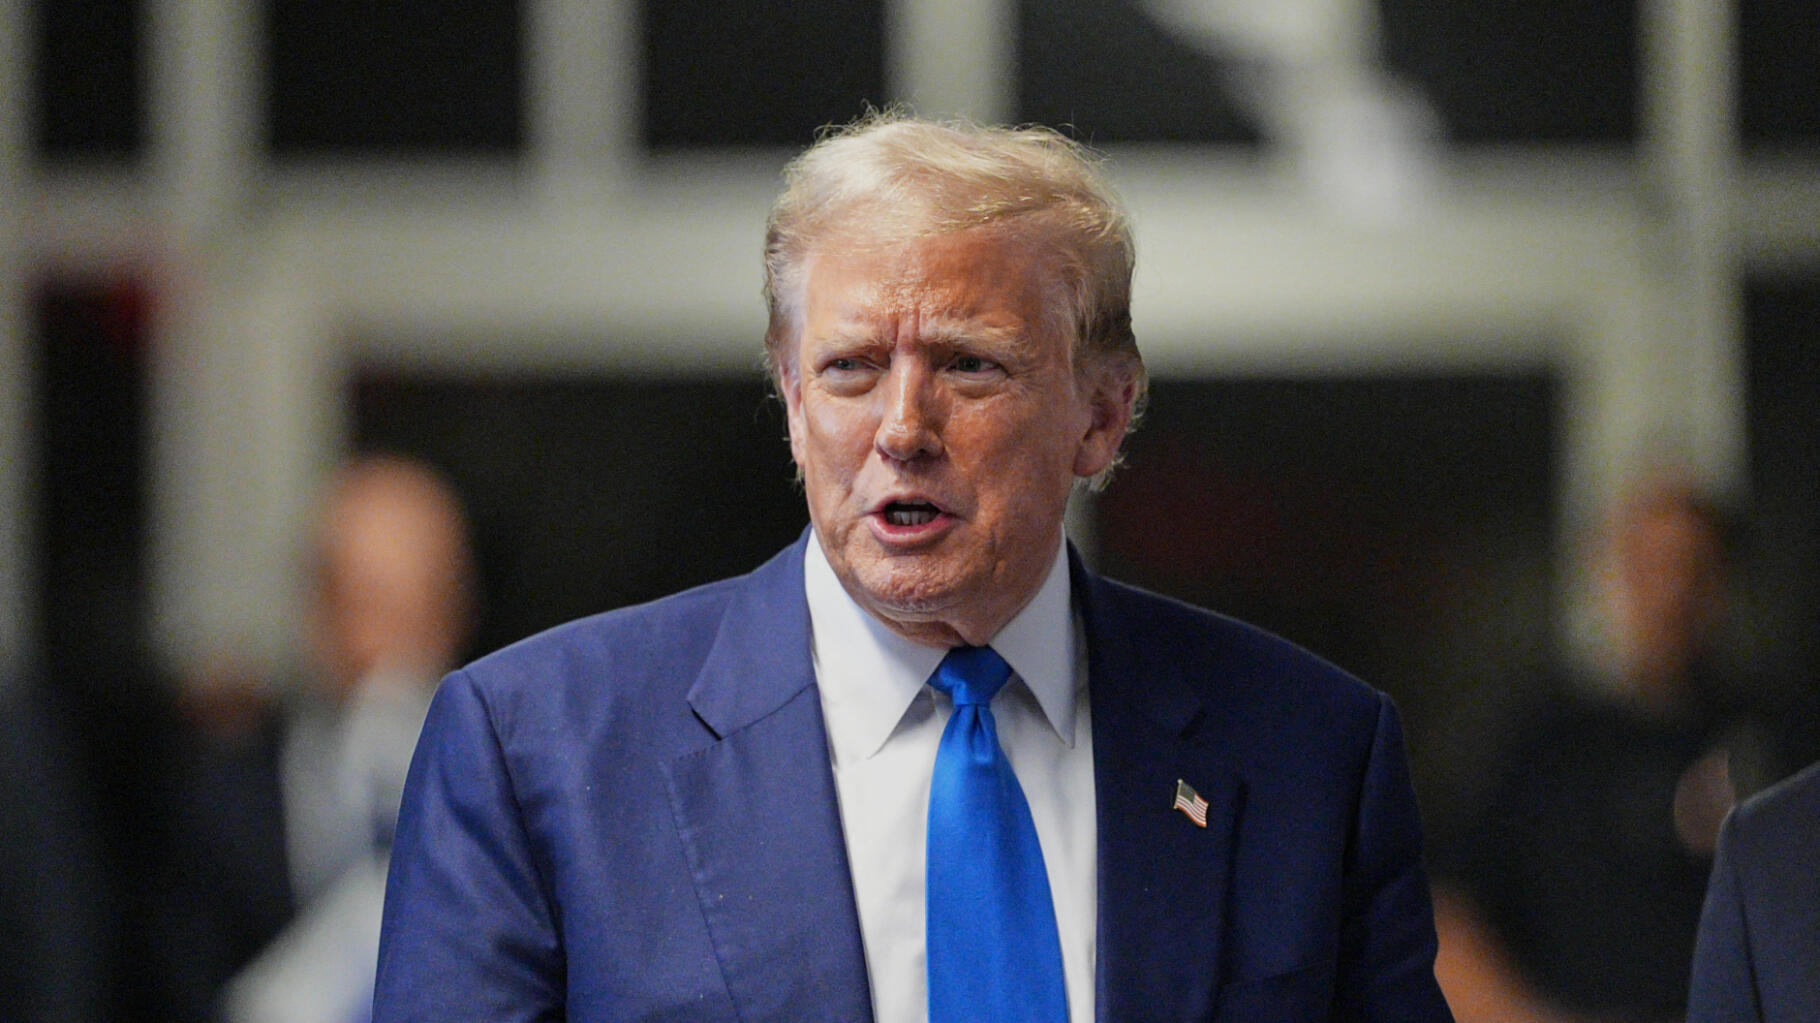 In the US, Donald Trump compares the Biden administration to the “Gestapo” and the White House reacts